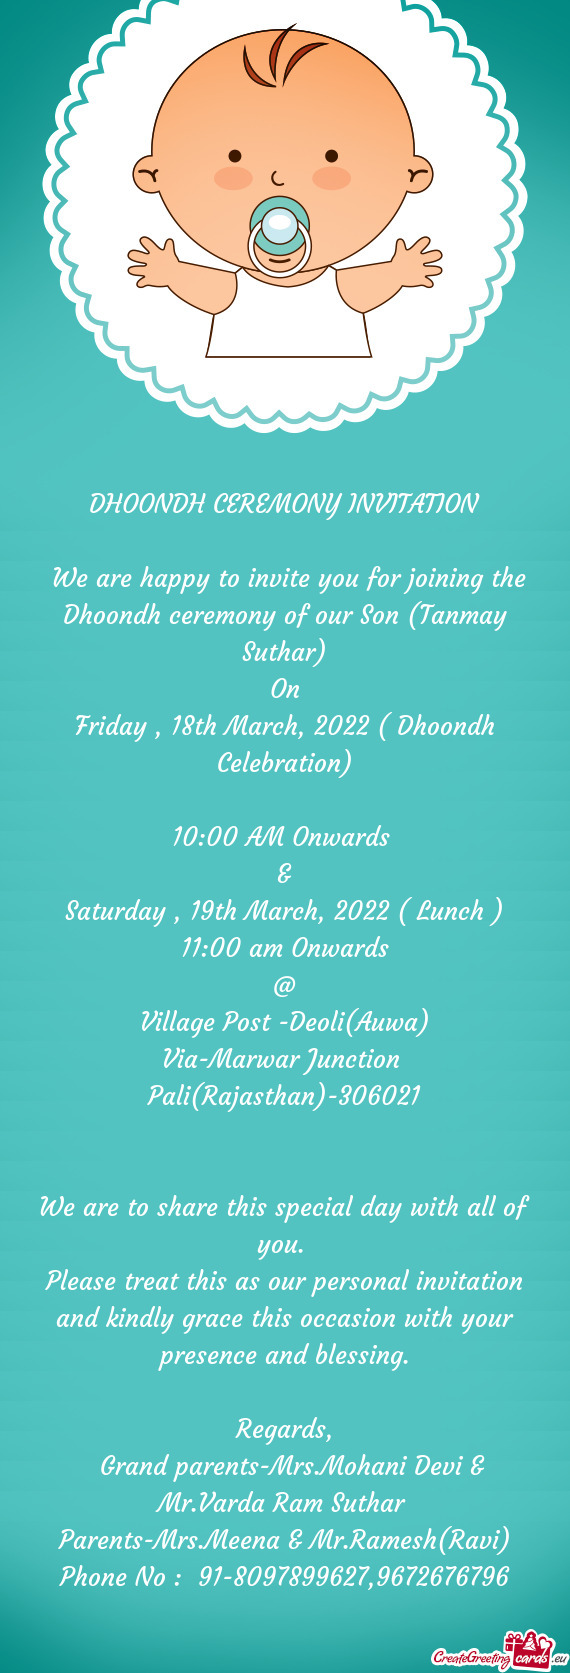 Friday , 18th March, 2022 ( Dhoondh Celebration)